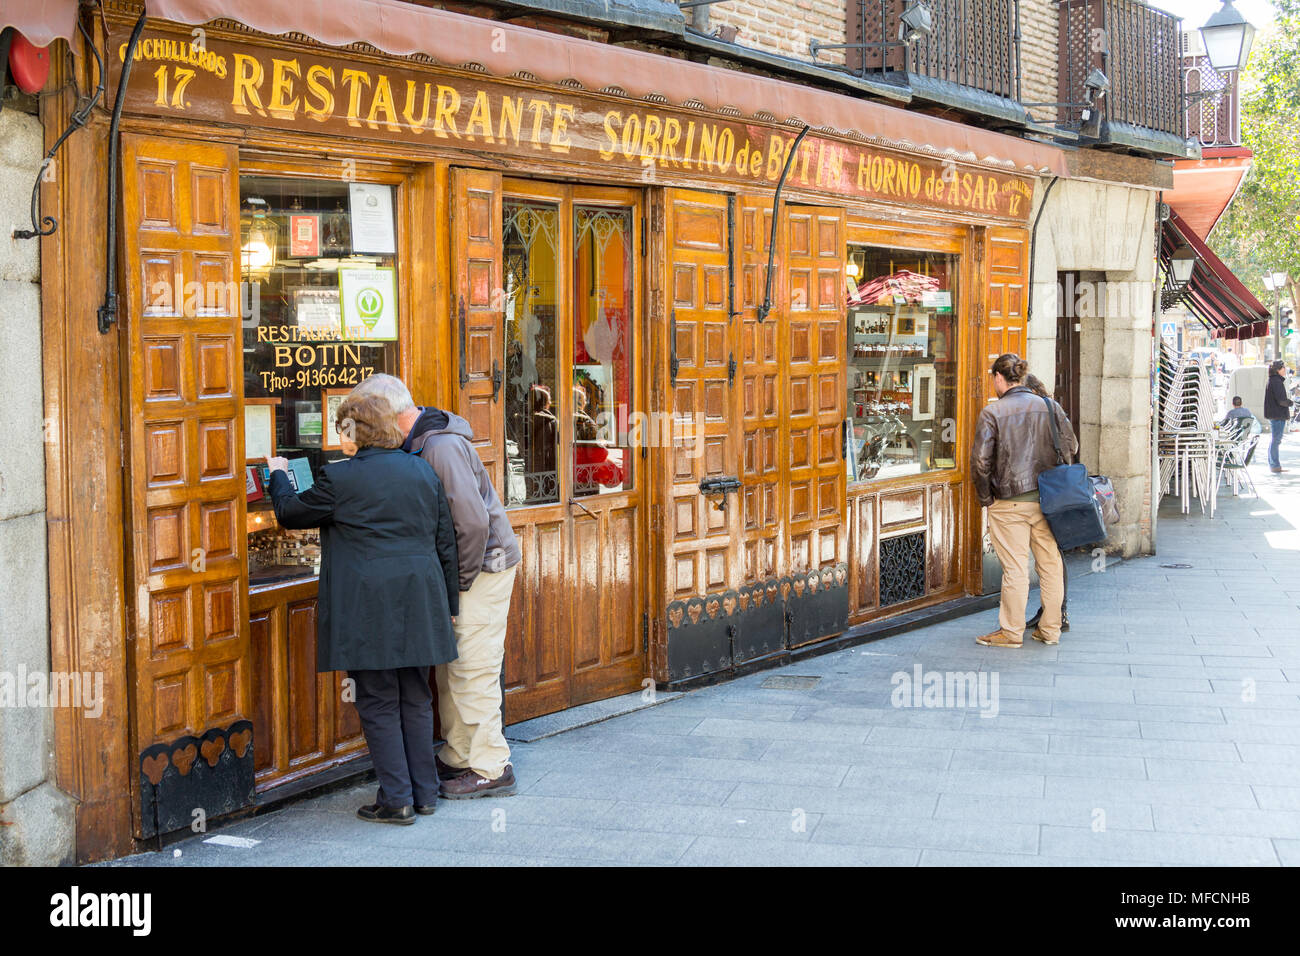 Madrid, Spain - March 6, 2015: The oldest continuously operating restaurant in the world is in Madrid, Spain, since 1725..  The Sobrino de Botín. Stock Photo